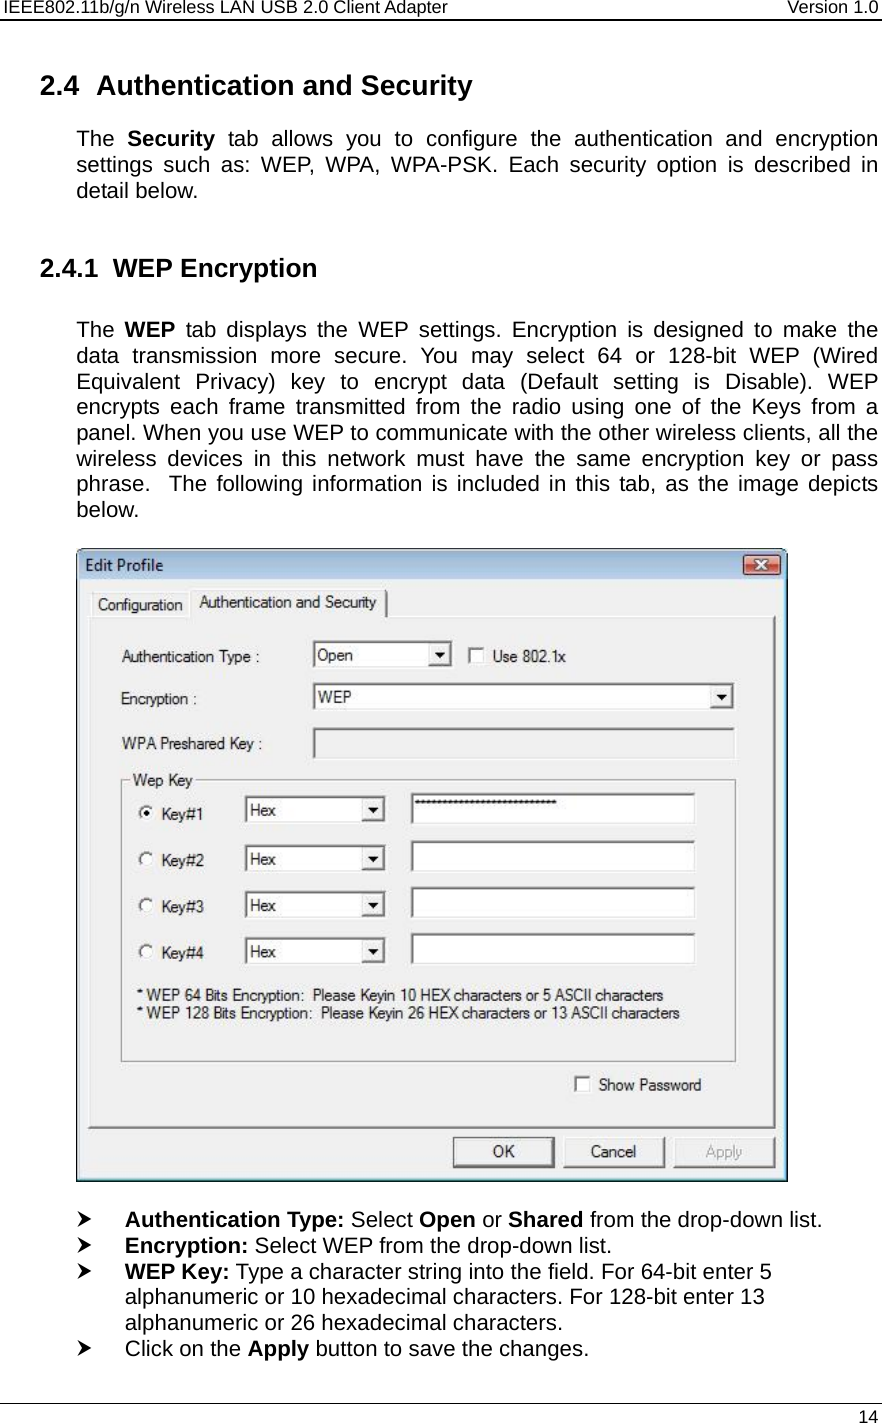 IEEE802.11b/g/n Wireless LAN USB 2.0 Client Adapter  Version 1.0   14  2.4  Authentication and Security The  Security tab allows you to configure the authentication and encryption settings such as: WEP, WPA, WPA-PSK. Each security option is described in detail below.   2.4.1 WEP Encryption  The  WEP tab displays the WEP settings. Encryption is designed to make the data transmission more secure. You may select 64 or 128-bit WEP (Wired Equivalent Privacy) key to encrypt data (Default setting is Disable). WEP encrypts each frame transmitted from the radio using one of the Keys from a panel. When you use WEP to communicate with the other wireless clients, all the wireless devices in this network must have the same encryption key or pass phrase.  The following information is included in this tab, as the image depicts below.    h Authentication Type: Select Open or Shared from the drop-down list.  h Encryption: Select WEP from the drop-down list.  h WEP Key: Type a character string into the field. For 64-bit enter 5 alphanumeric or 10 hexadecimal characters. For 128-bit enter 13 alphanumeric or 26 hexadecimal characters.  h Click on the Apply button to save the changes.  